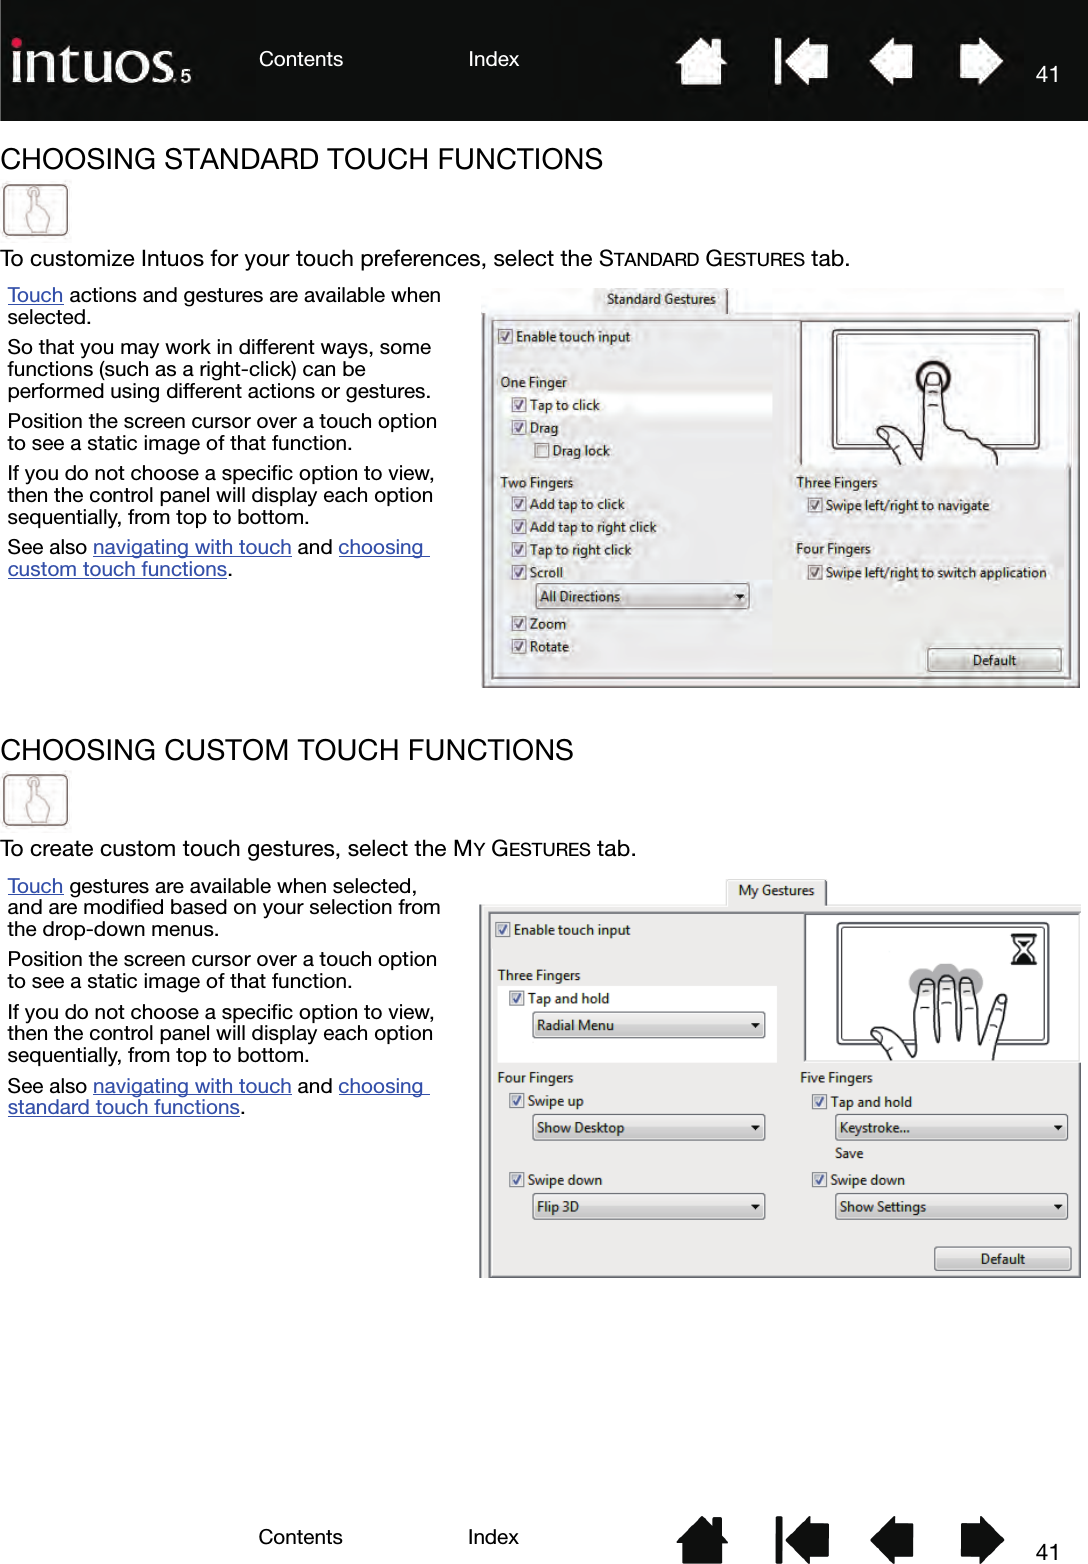 41IndexContents41IndexContentsCHOOSING STANDARD TOUCH FUNCTIONSTo customize Intuos for your touch preferences, select the STANDARD GESTURES tab.CHOOSING CUSTOM TOUCH FUNCTIONSTo create custom touch gestures, select the MY GESTURES tab.To u c h  actions and gestures are available when selected.So that you may work in different ways, some functions (such as a right-click) can be performed using different actions or gestures.Position the screen cursor over a touch option to see a static image of that function.If you do not choose a specific option to view, then the control panel will display each option sequentially, from top to bottom.See also navigating with touch and choosing custom touch functions.To u c h  gestures are available when selected, and are modified based on your selection from the drop-down menus.Position the screen cursor over a touch option to see a static image of that function.If you do not choose a specific option to view, then the control panel will display each option sequentially, from top to bottom.See also navigating with touch and choosing standard touch functions.